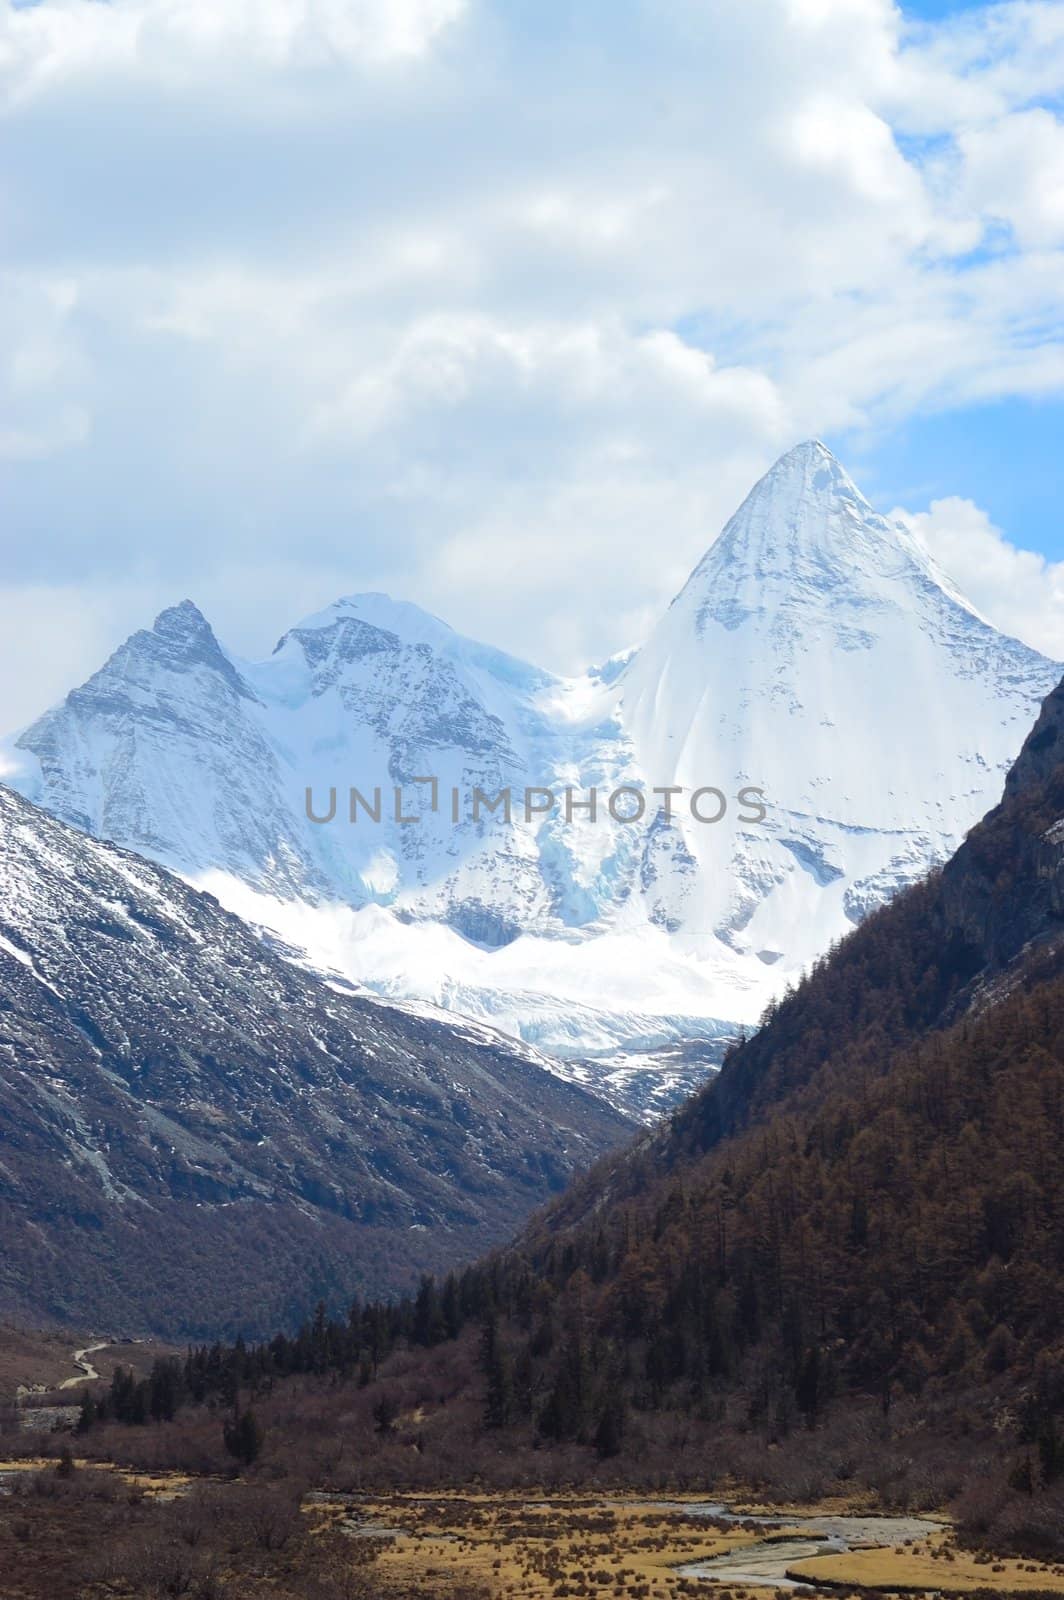 Snowy Mountains in Yading, Daocheng county, Ganzi district, Sichuan province, China